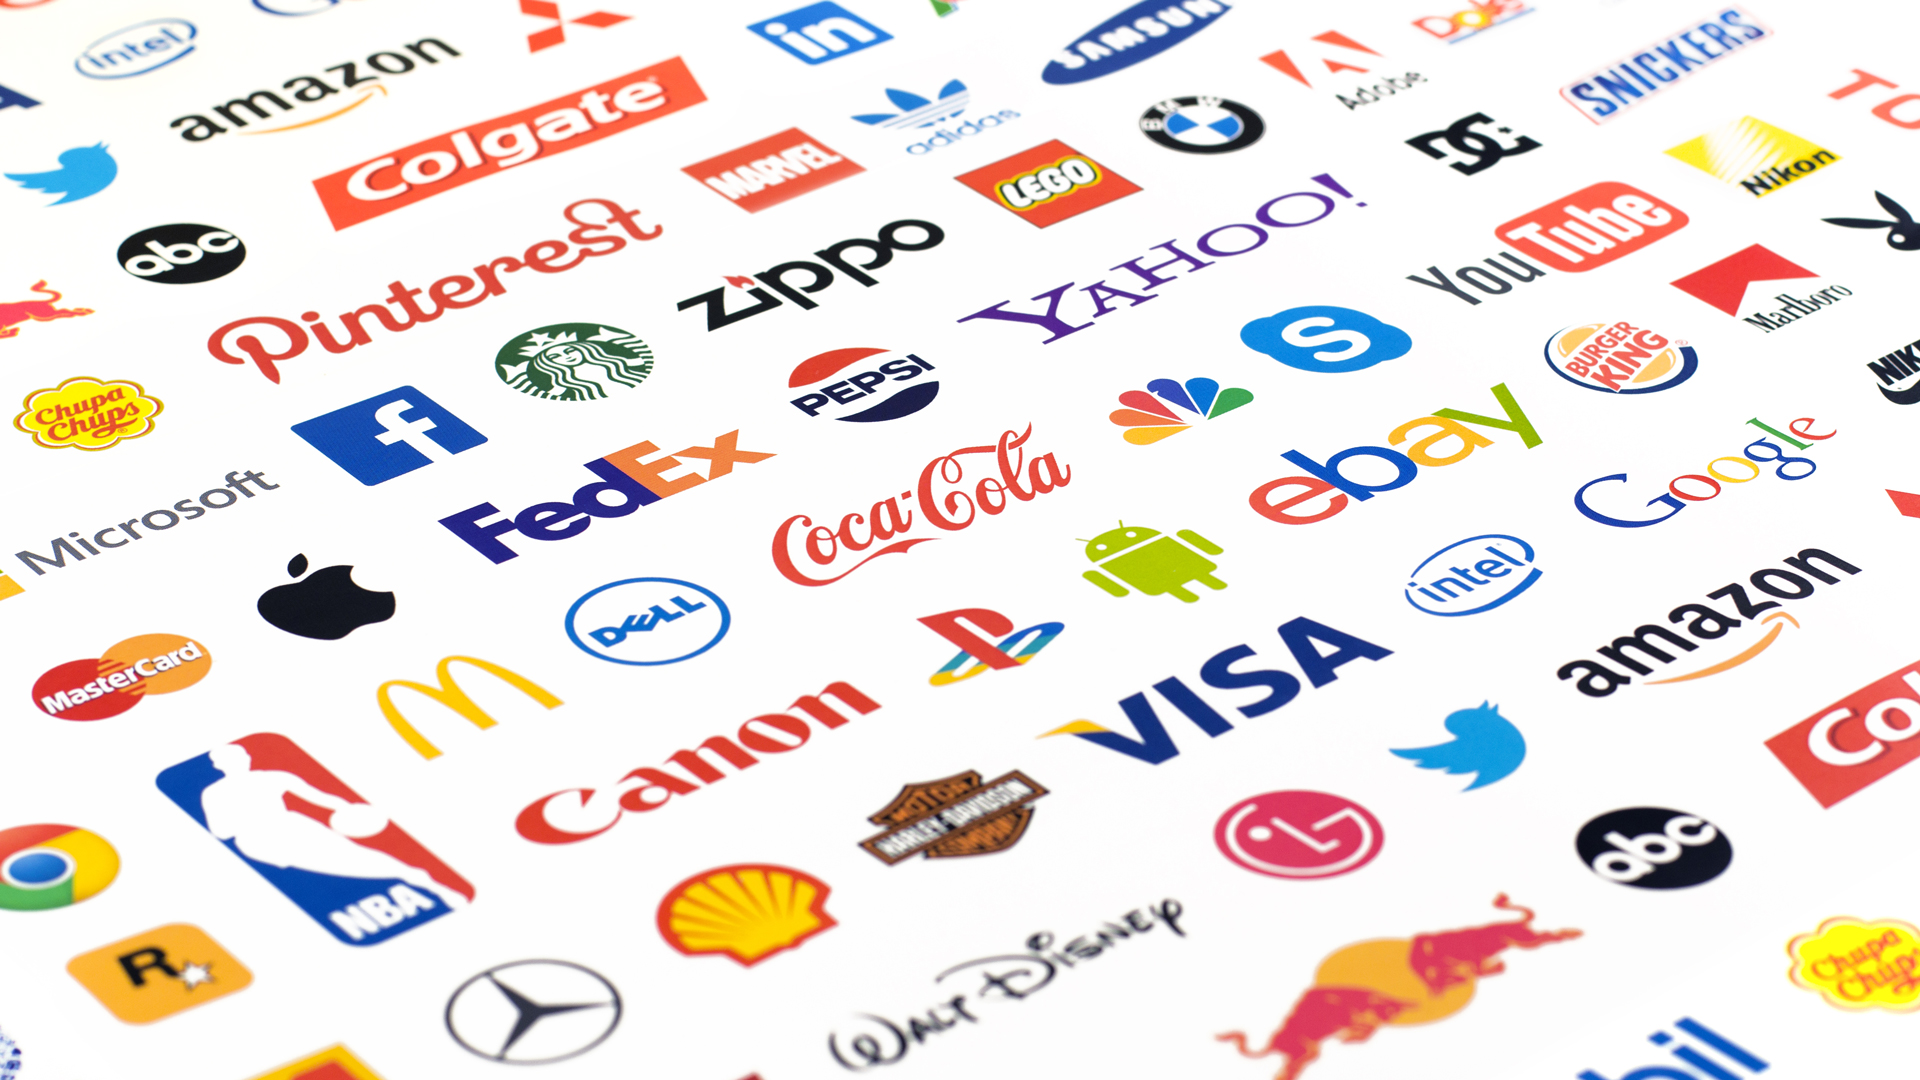 branding study with various successful company logos